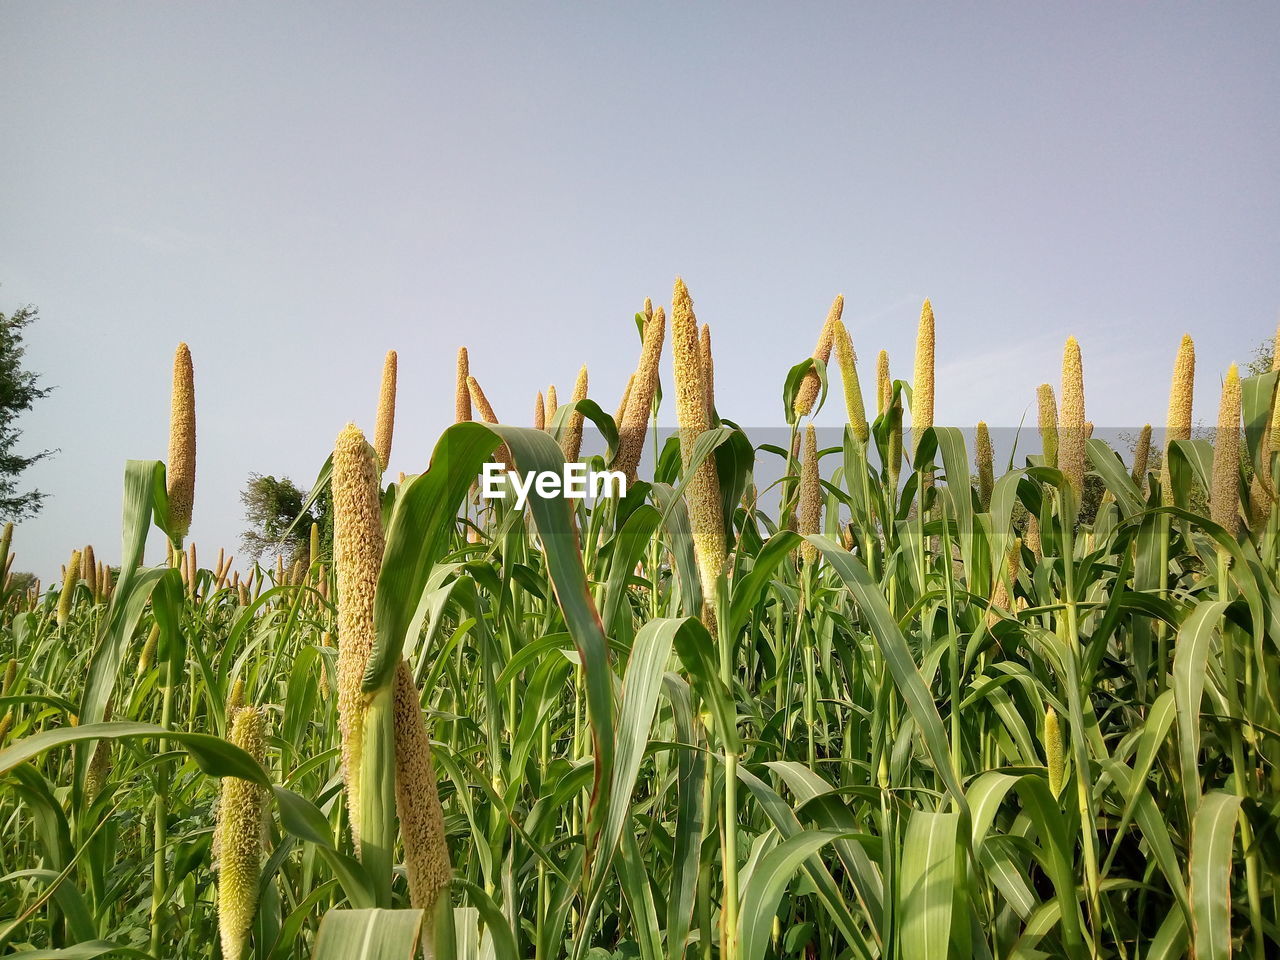 CLOSE-UP OF CROPS GROWING IN FIELD AGAINST CLEAR SKY